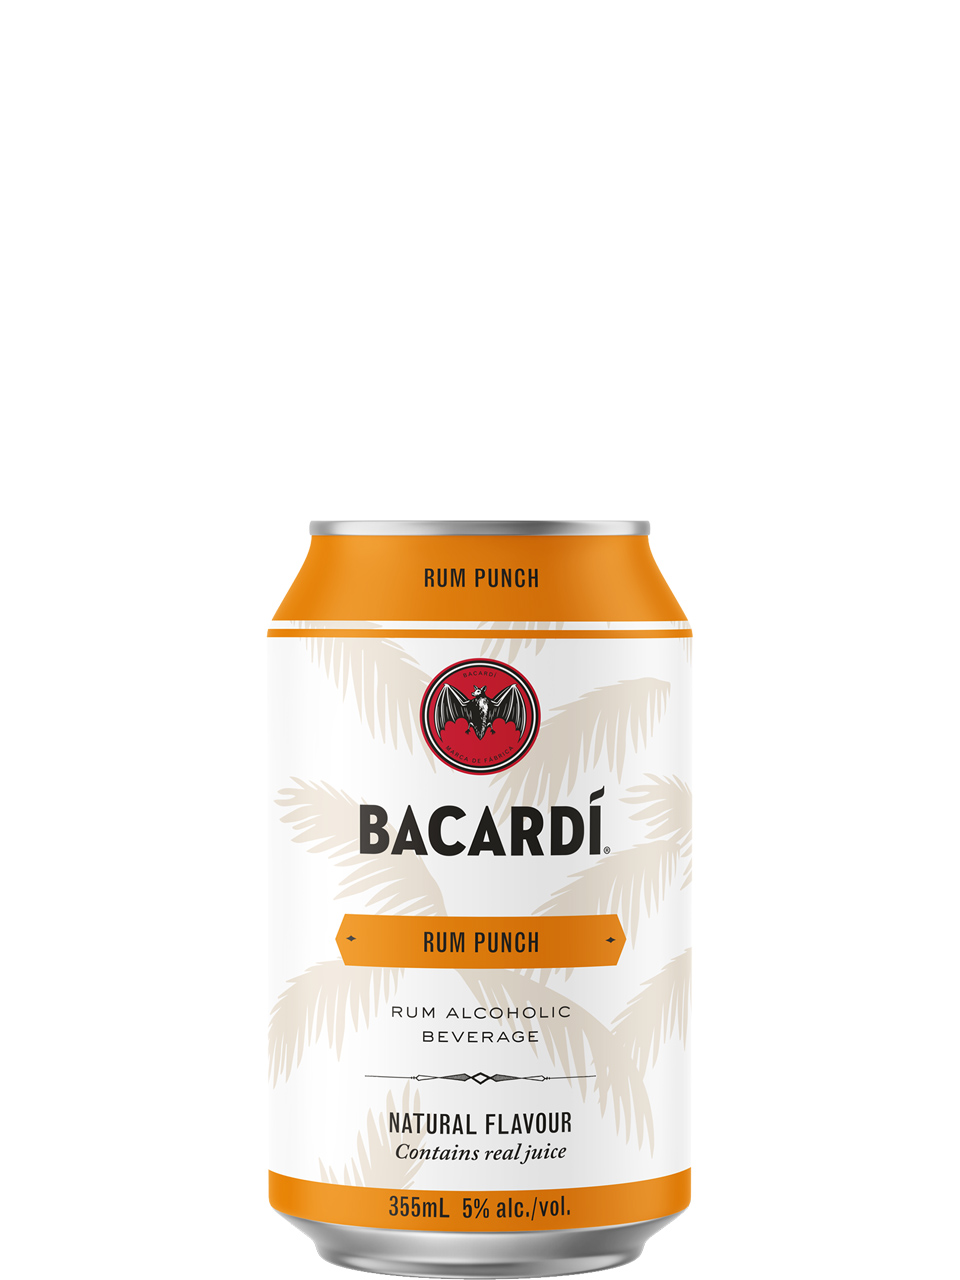 Bacardi Rum Punch 6 Pack Cans